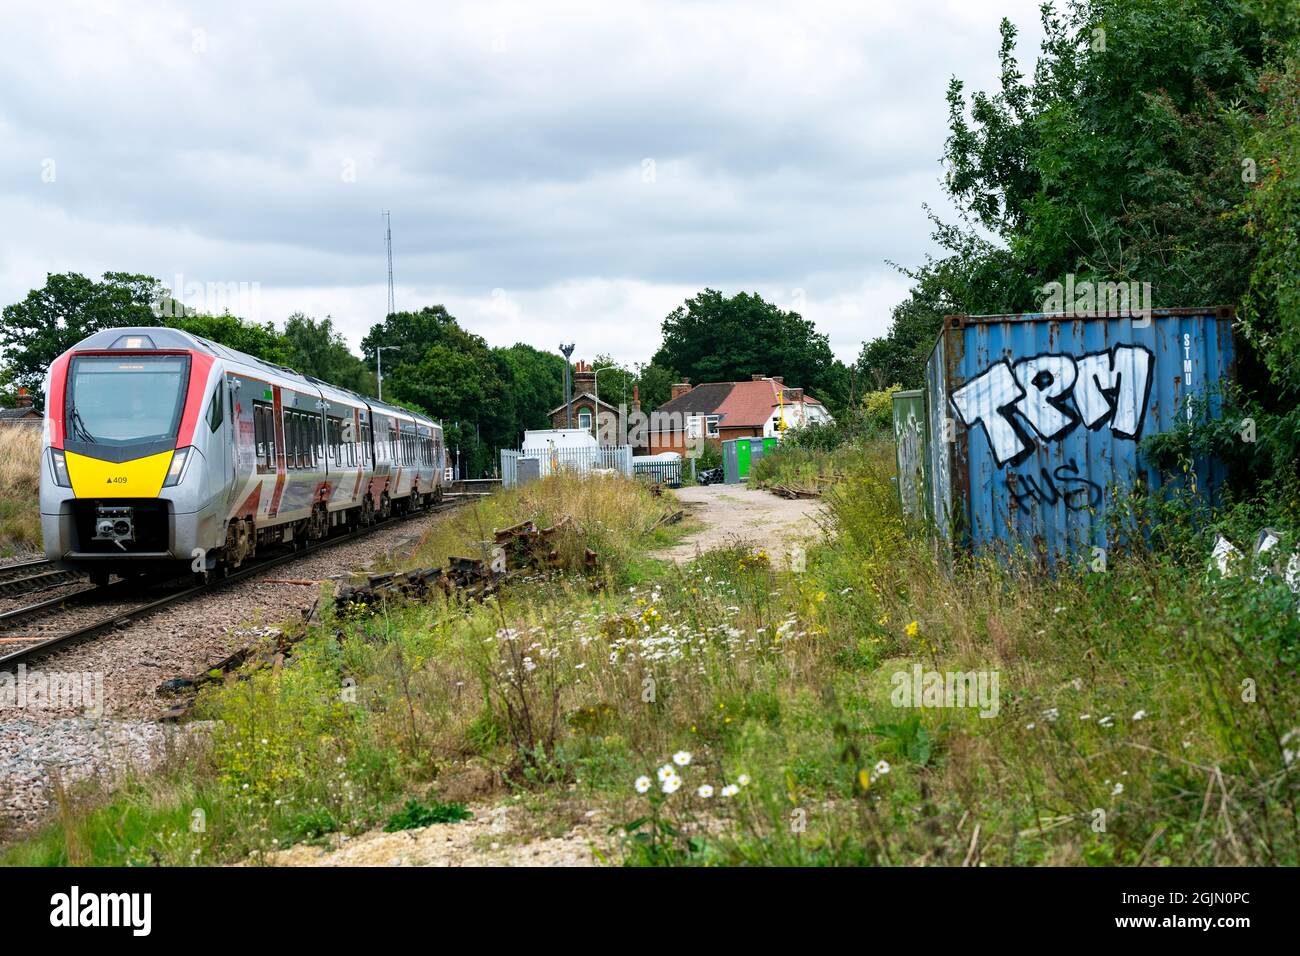 GreaterAnglia passenger train on the East Suffolk branch line though Westerfield heading towards Ipswich. Stock Photo